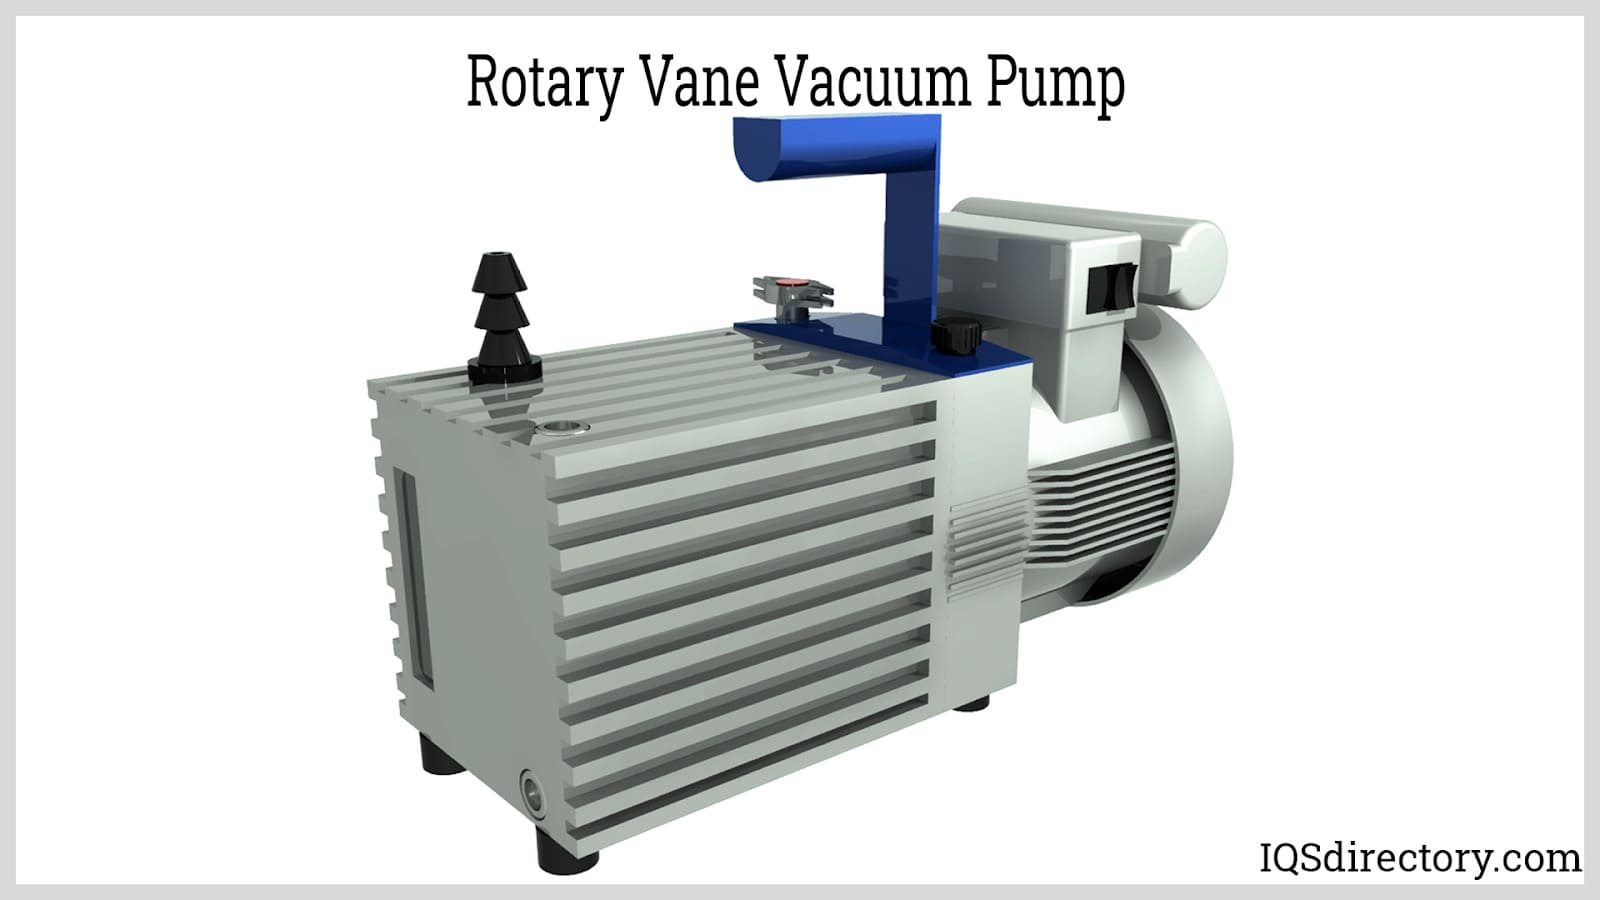 Rotary Vane Vacuum Pumps: Types, Applications, Benefits, and Design